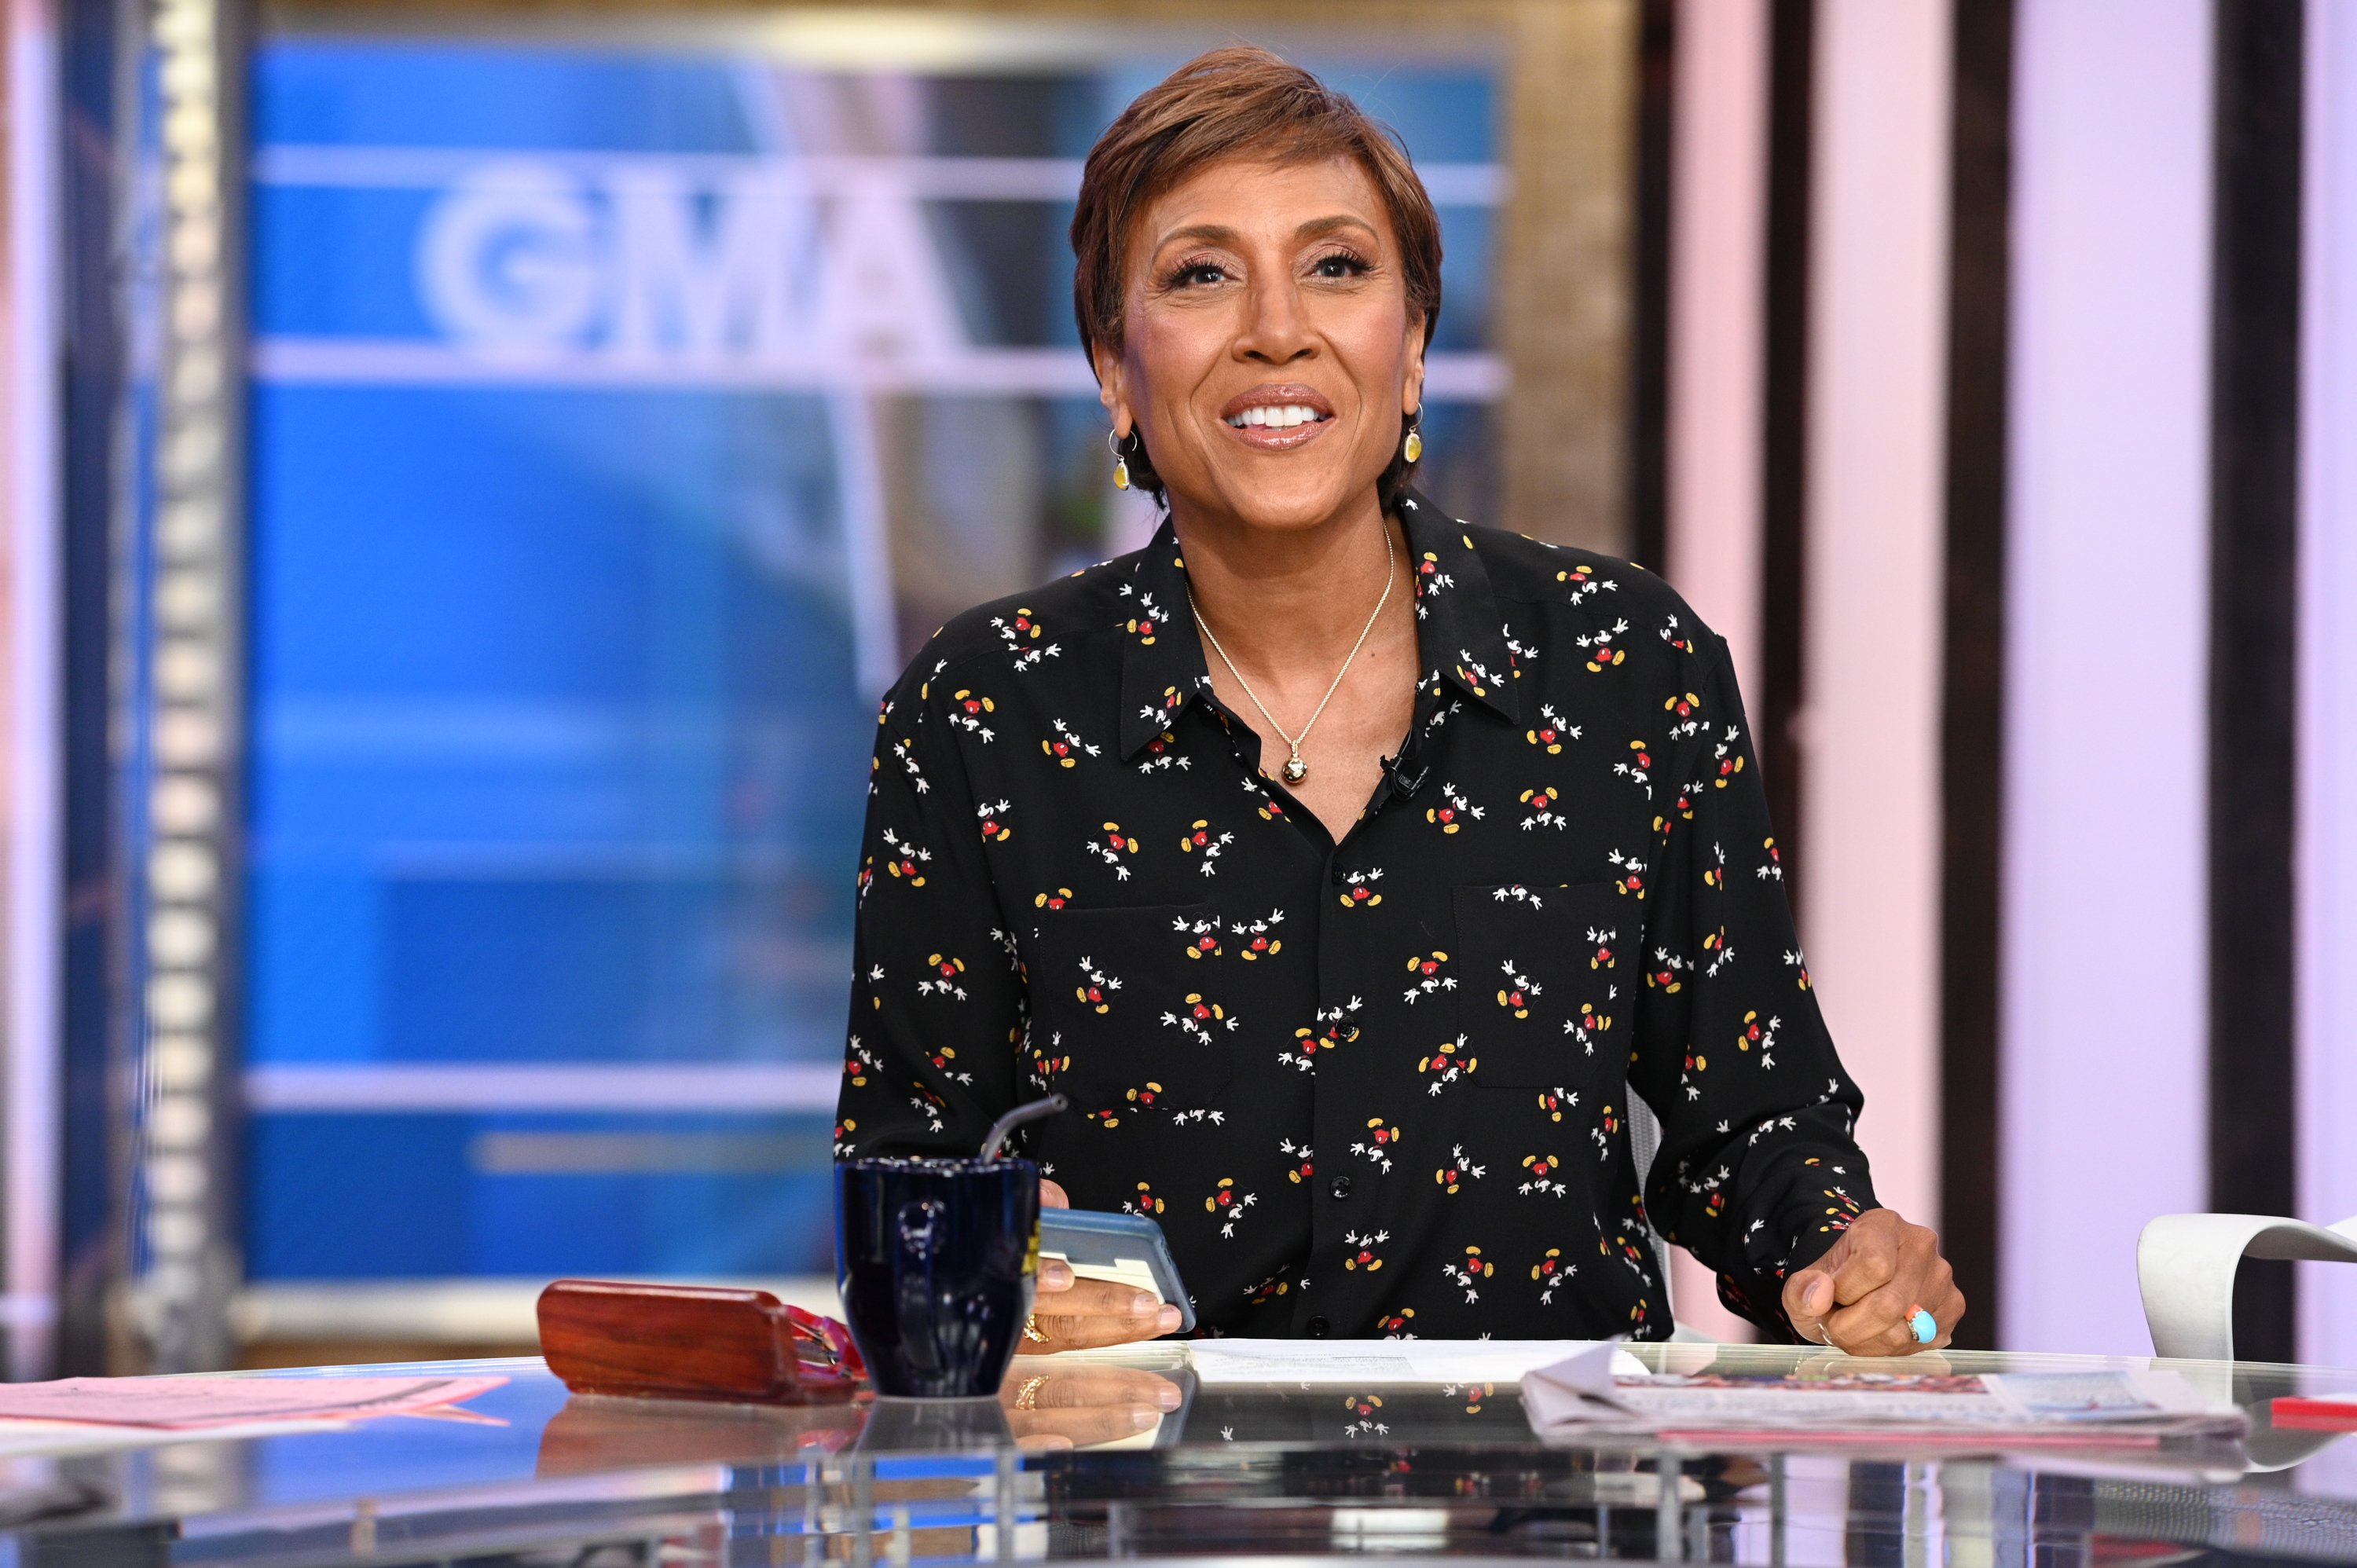 Robin Roberts celebrating her 30th year with "Good Morning America" in January 2020. | Photo: Getty Images